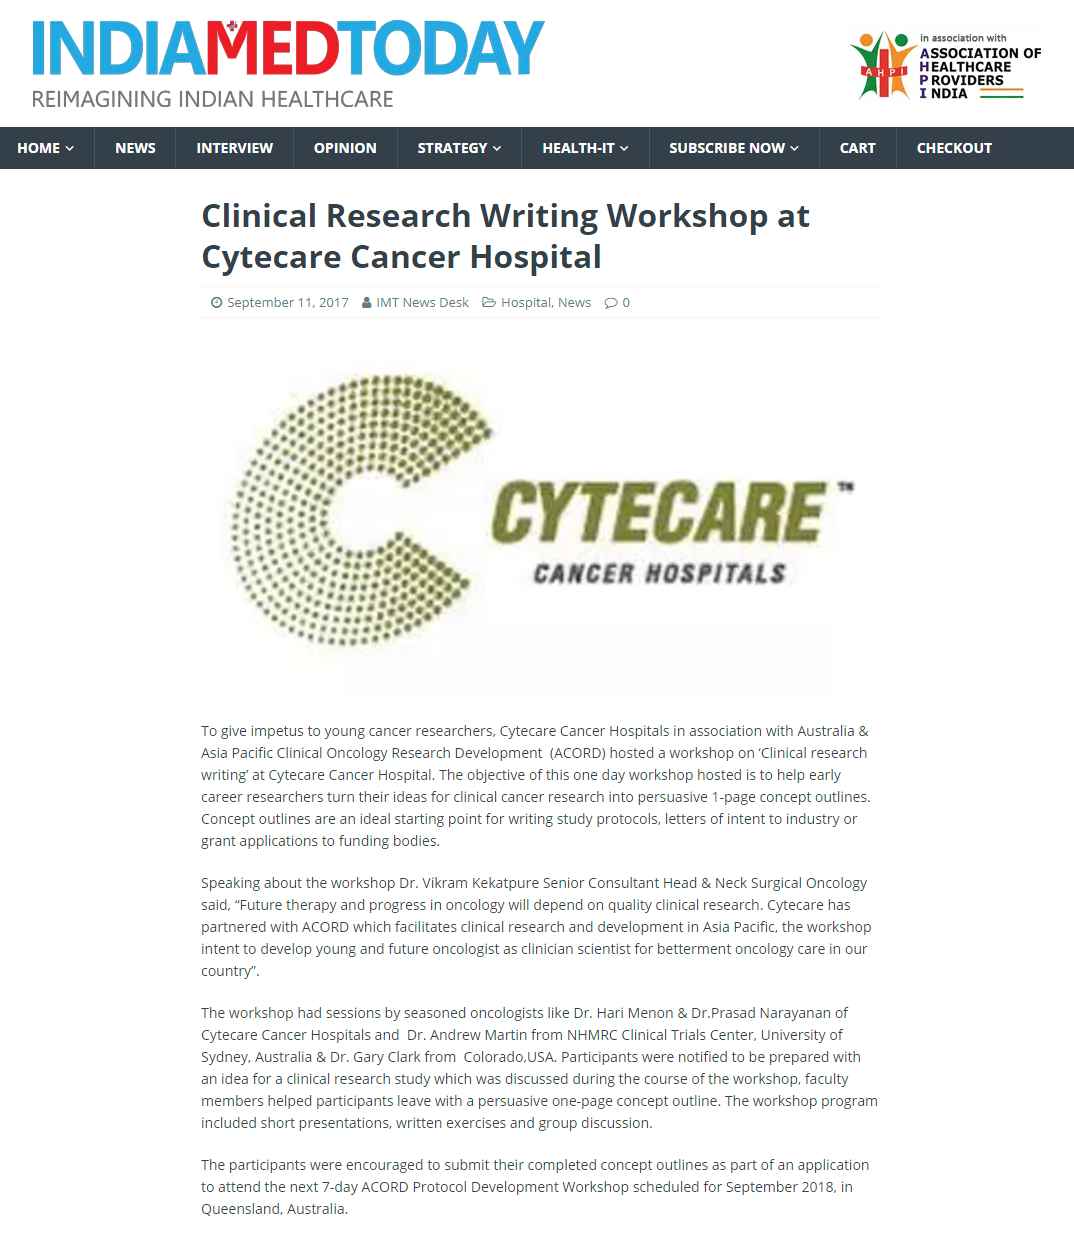 Clinical Research Writing Workshop at Cytecare Cancer Hospital